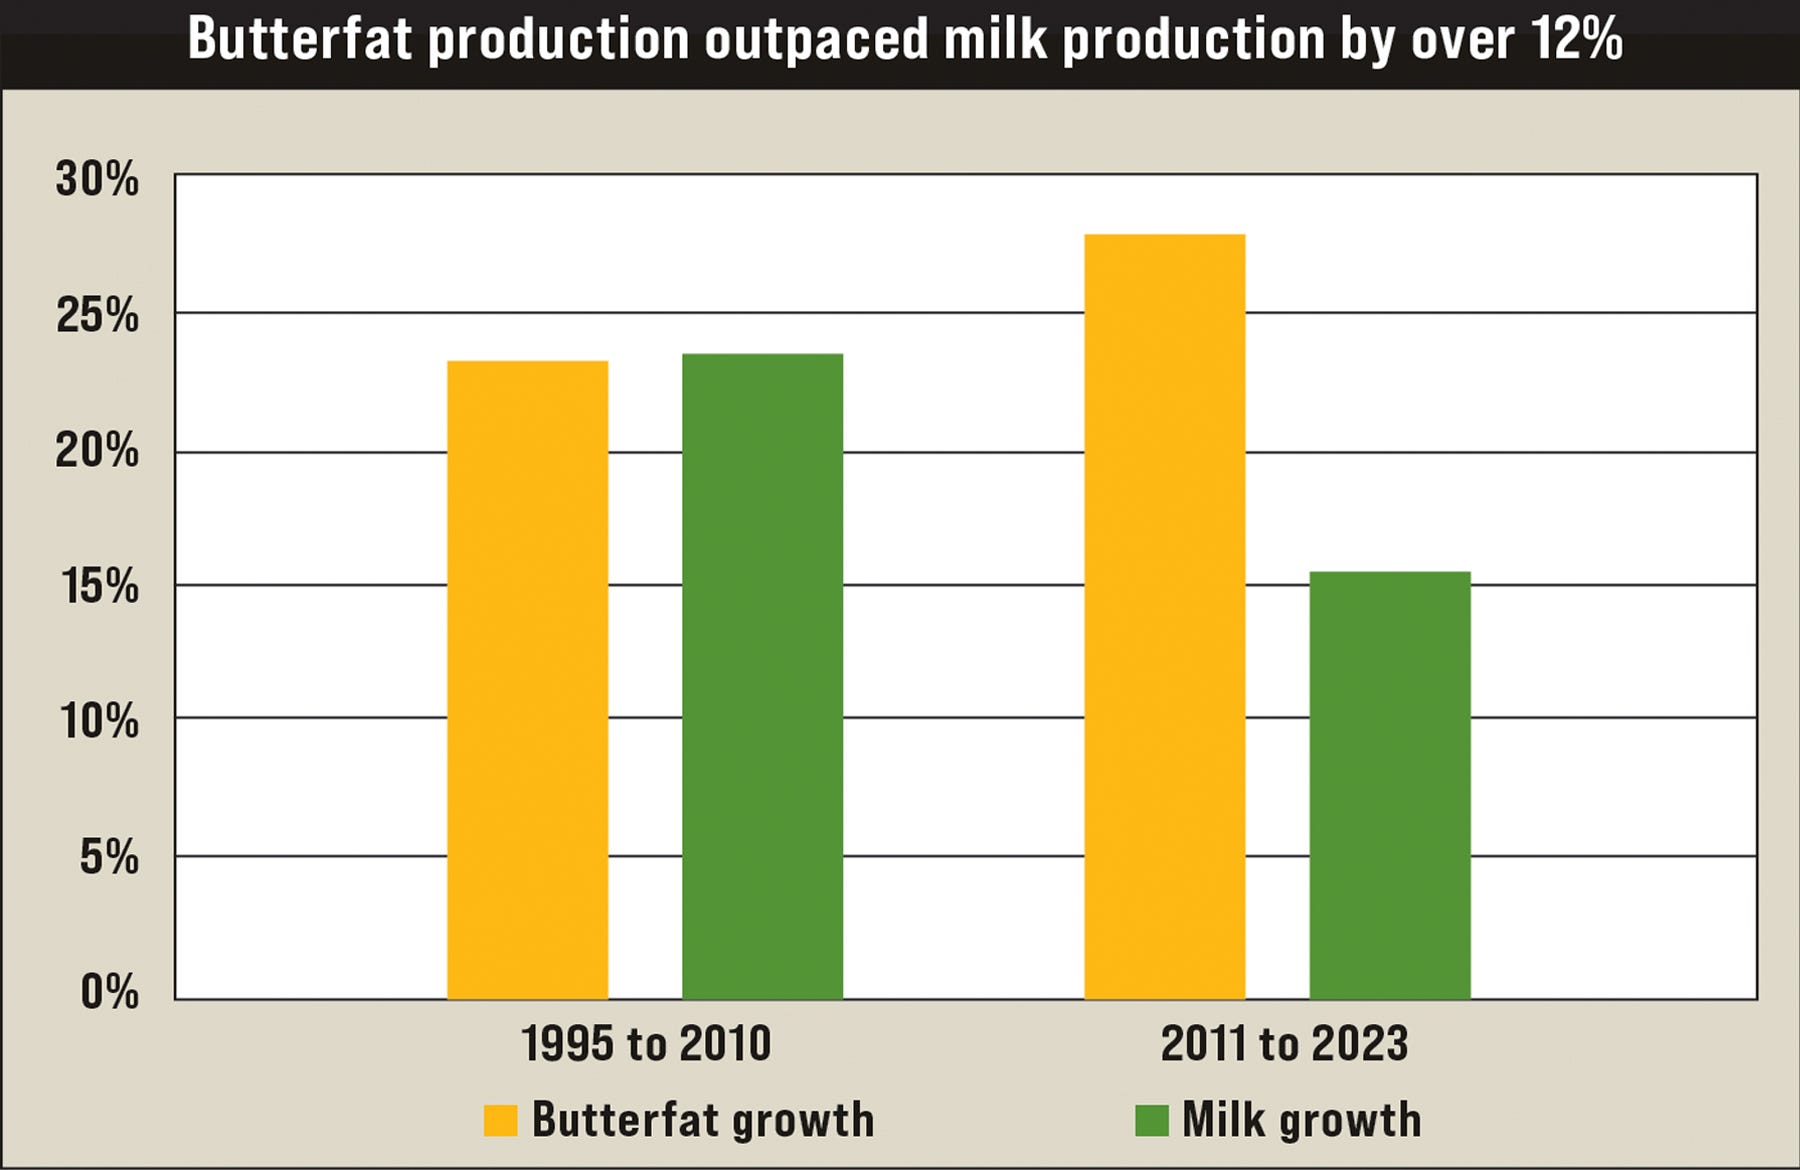 bar chart showing how butterfat production outpaced milk production by over 12%